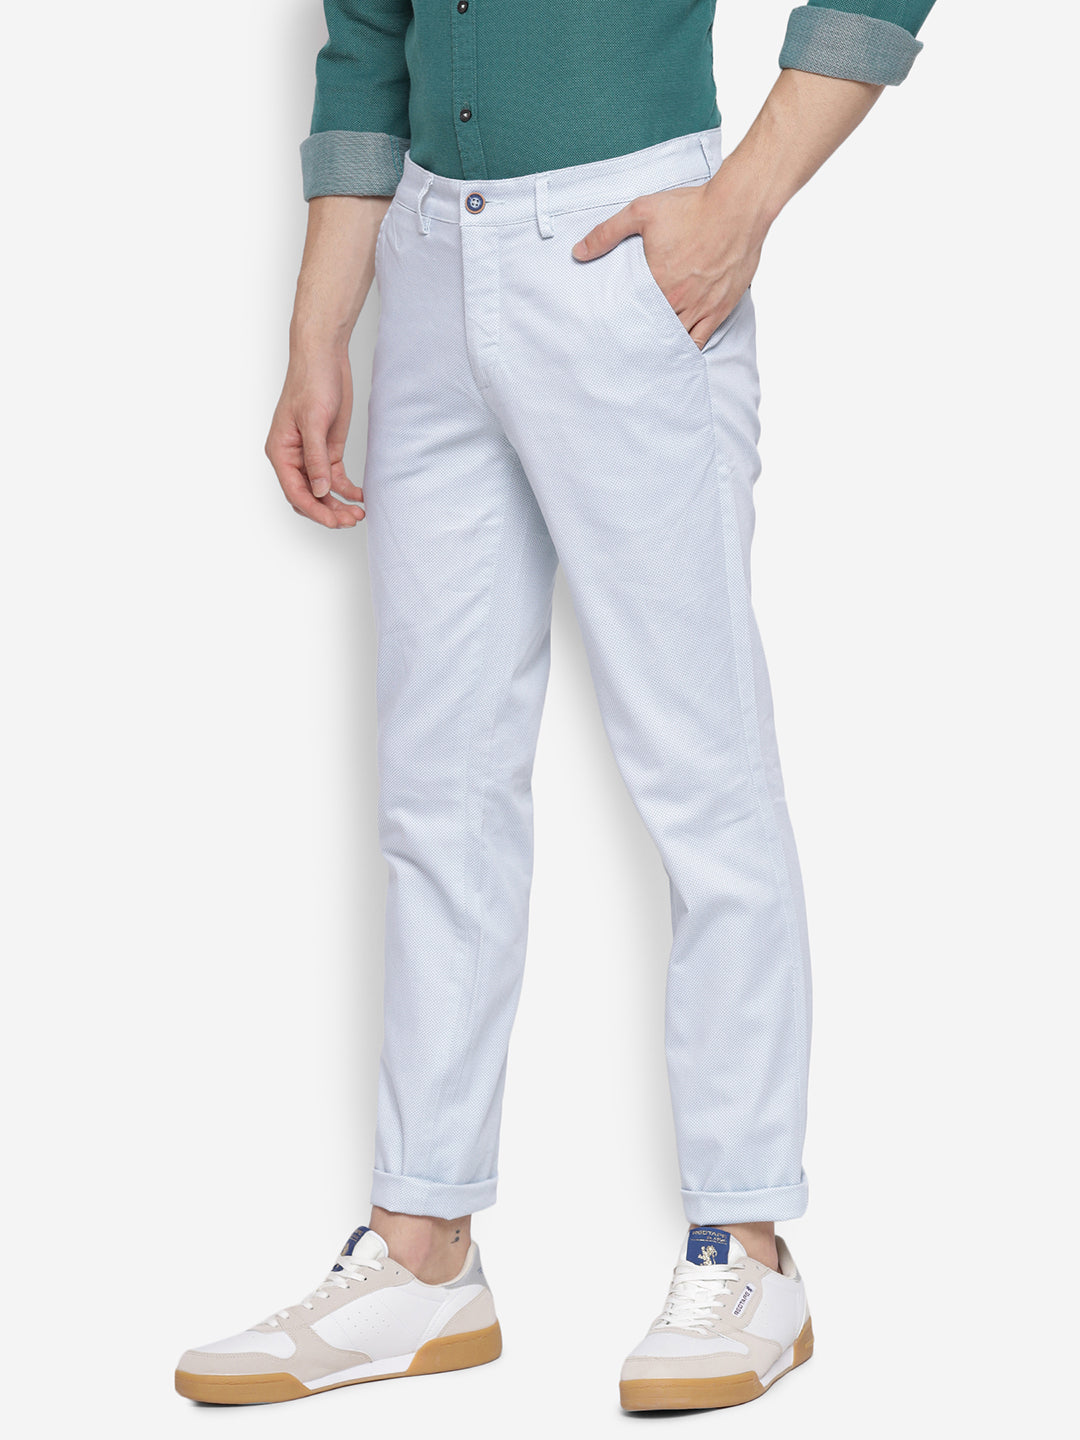 Printed White Ultra Slim Fit Causal Trouser